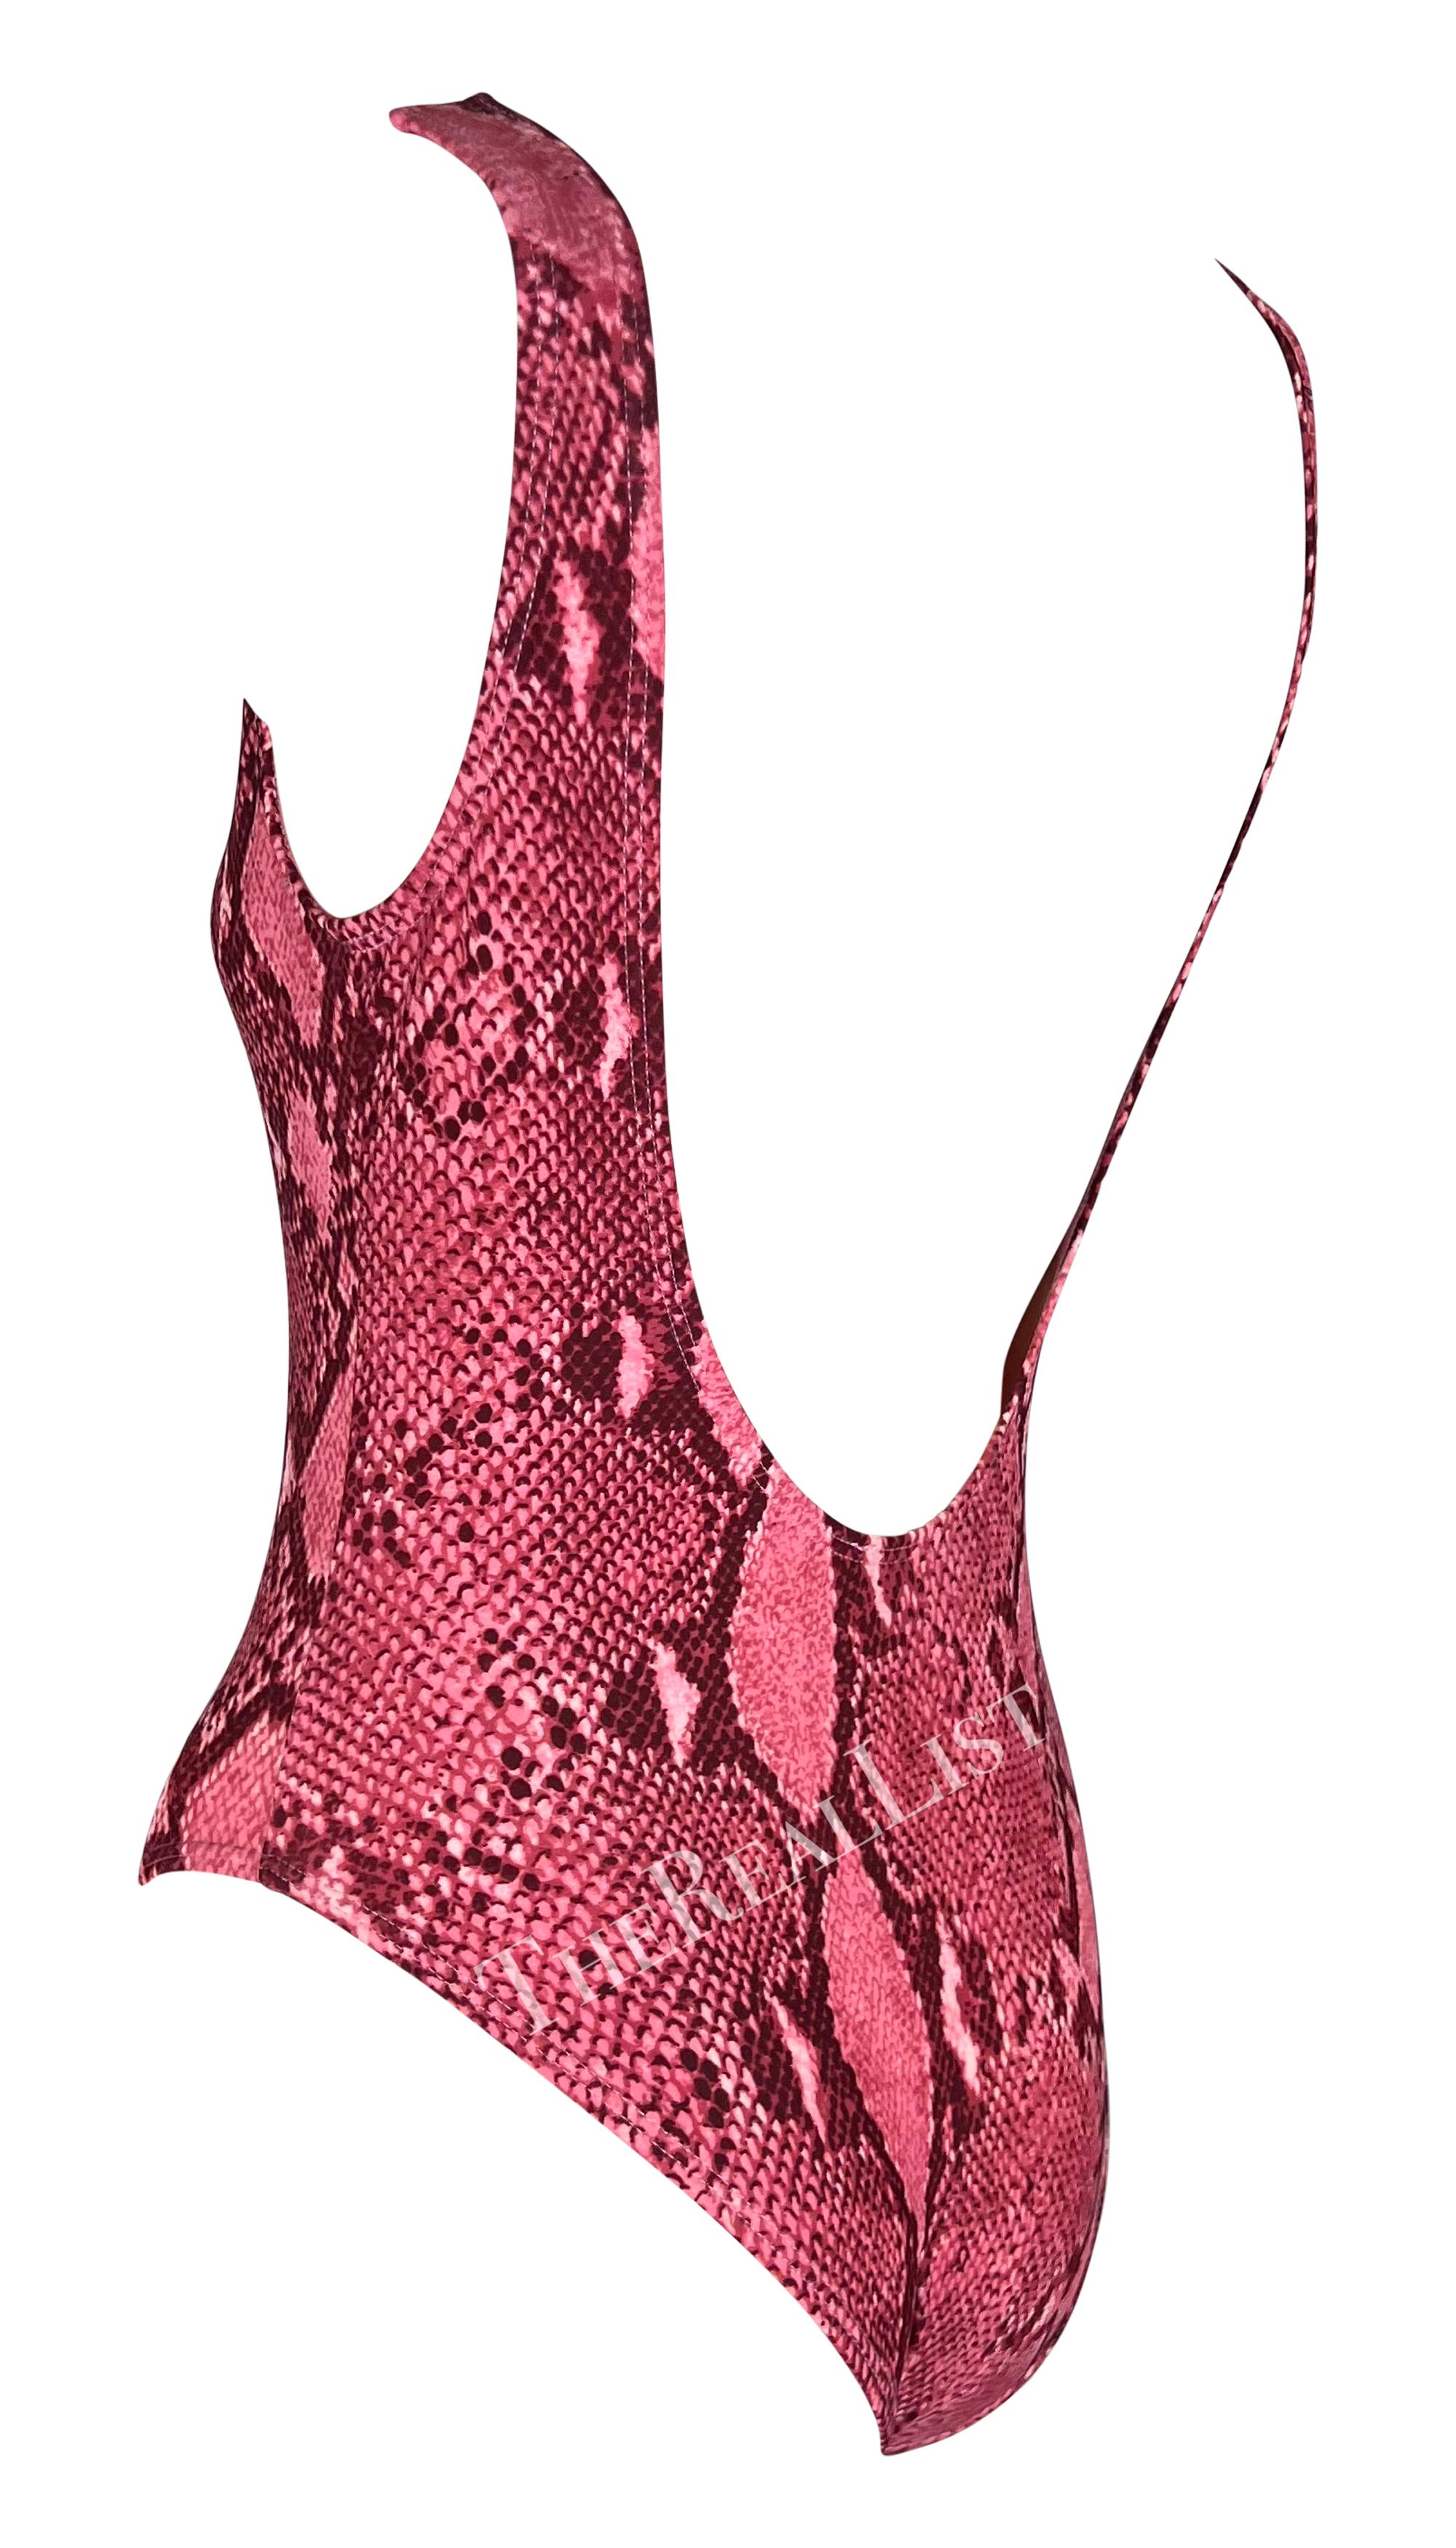 Women's S/S 2000 Gucci by Tom Ford Pink Snakeskin Print One Piece Swimsuit Bodysuit For Sale